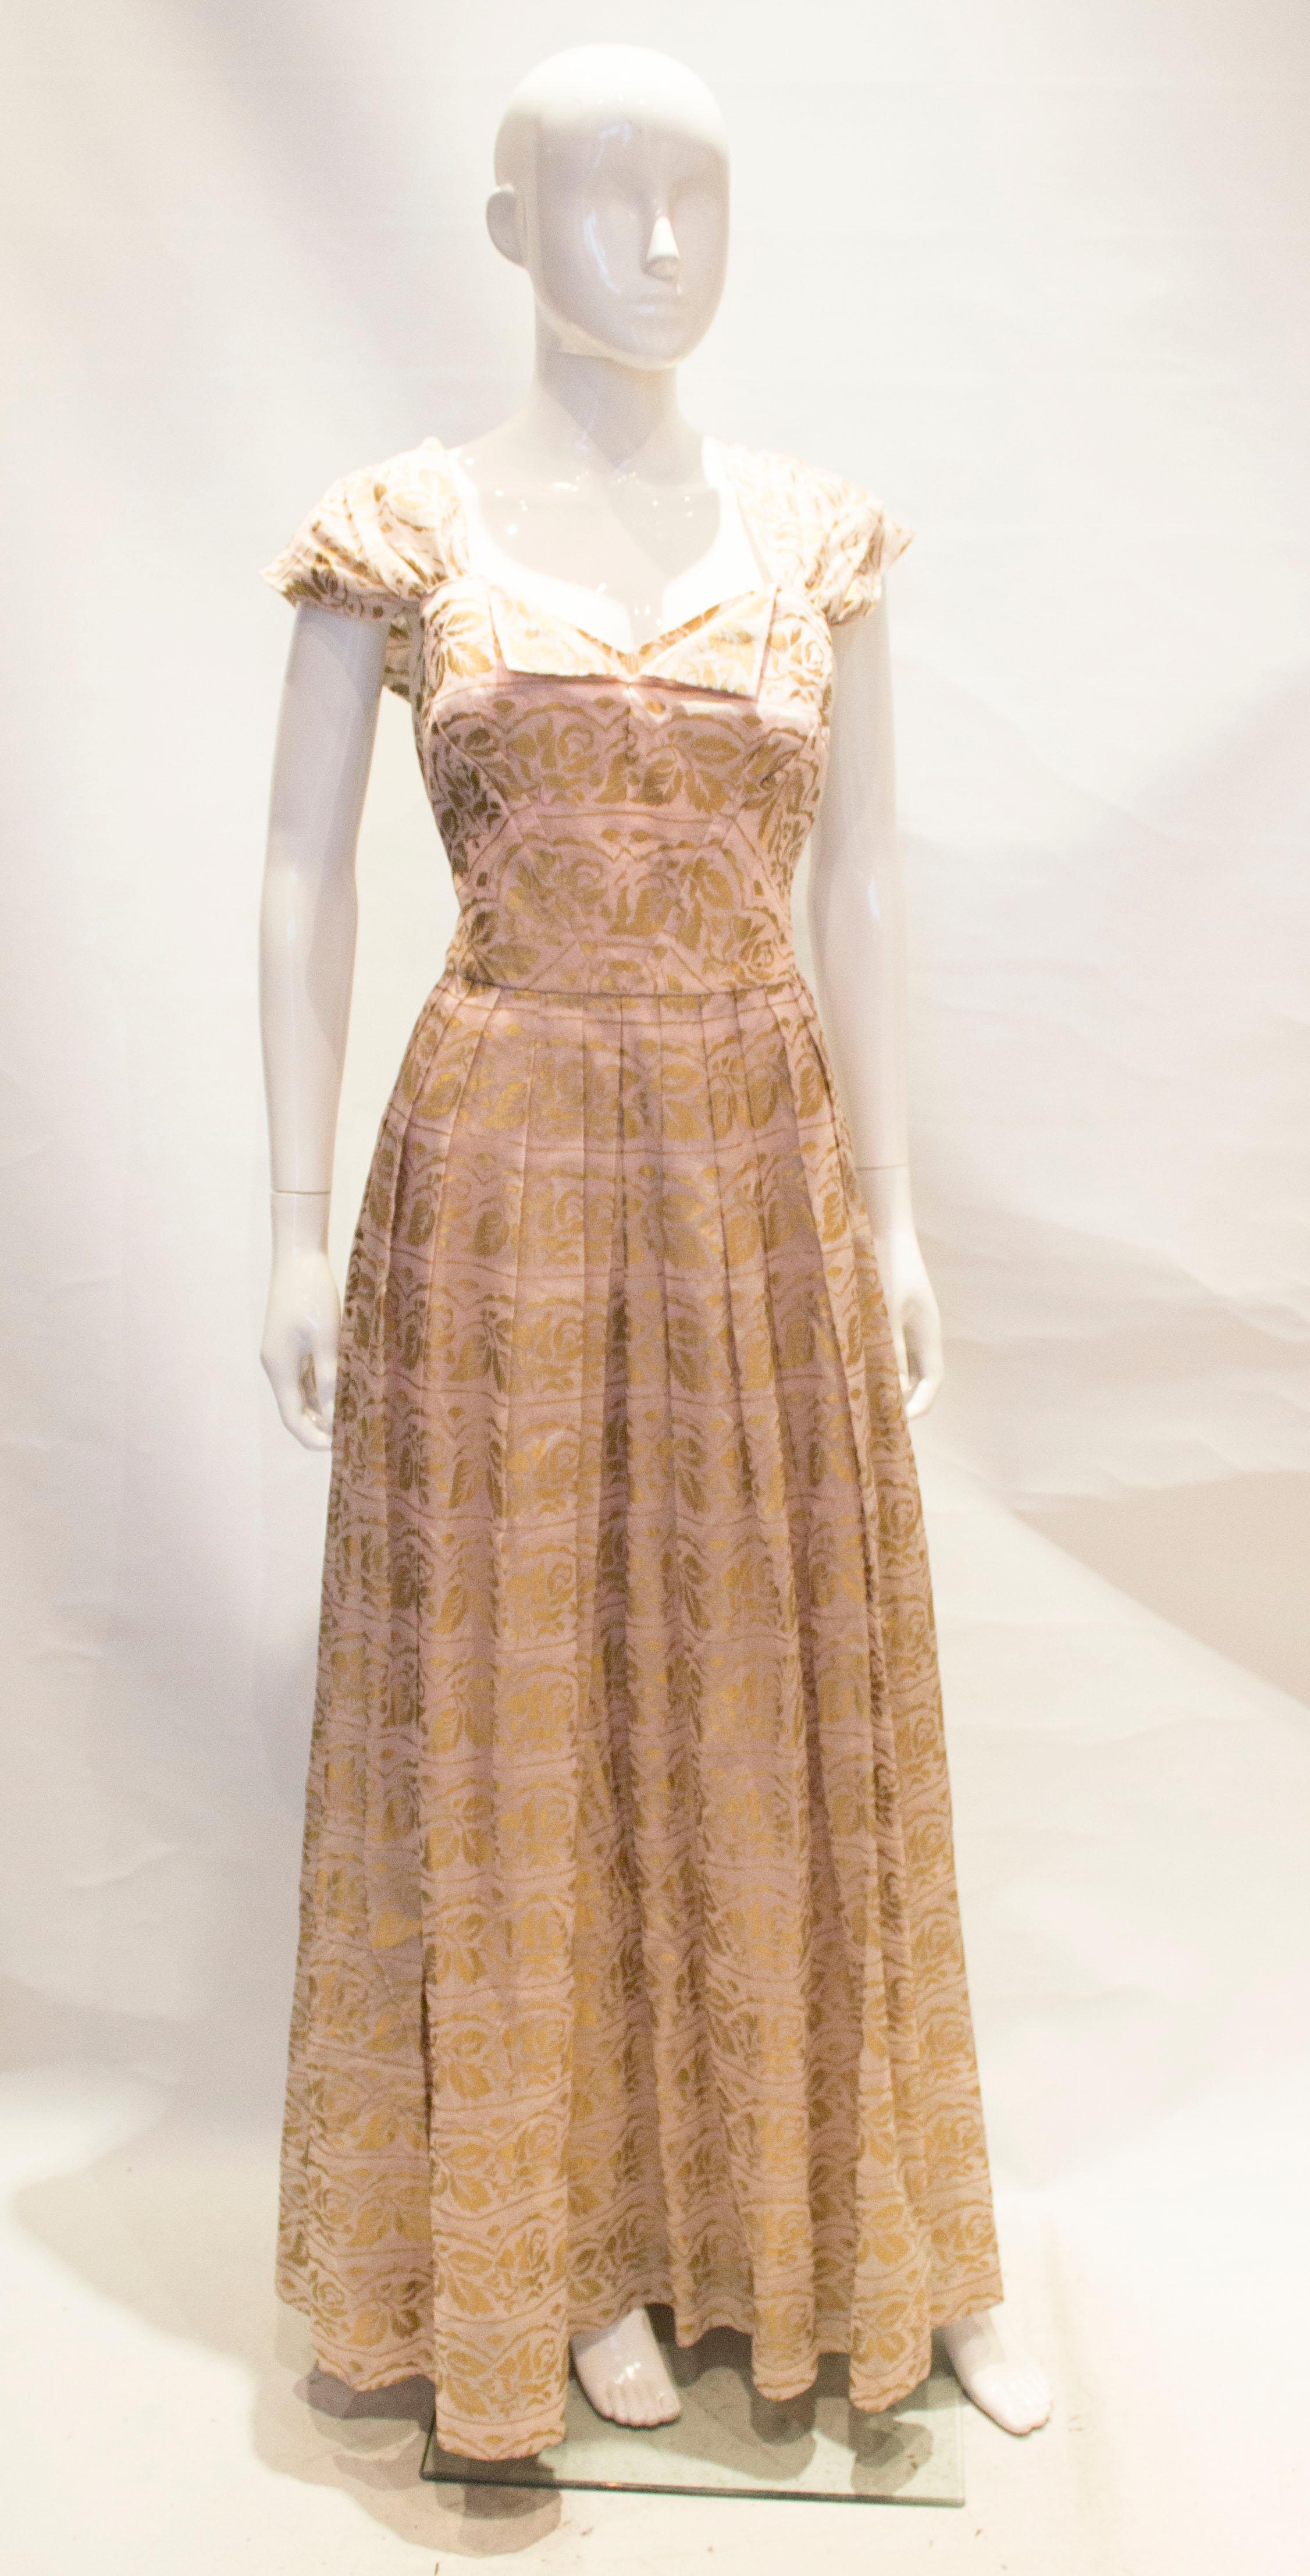 A pretty vintage party gown by Gina Couture. The dress is in a pink fabric with gold floral detail. It has a central  back zip, is fully lined and has a fold over detail at the front.